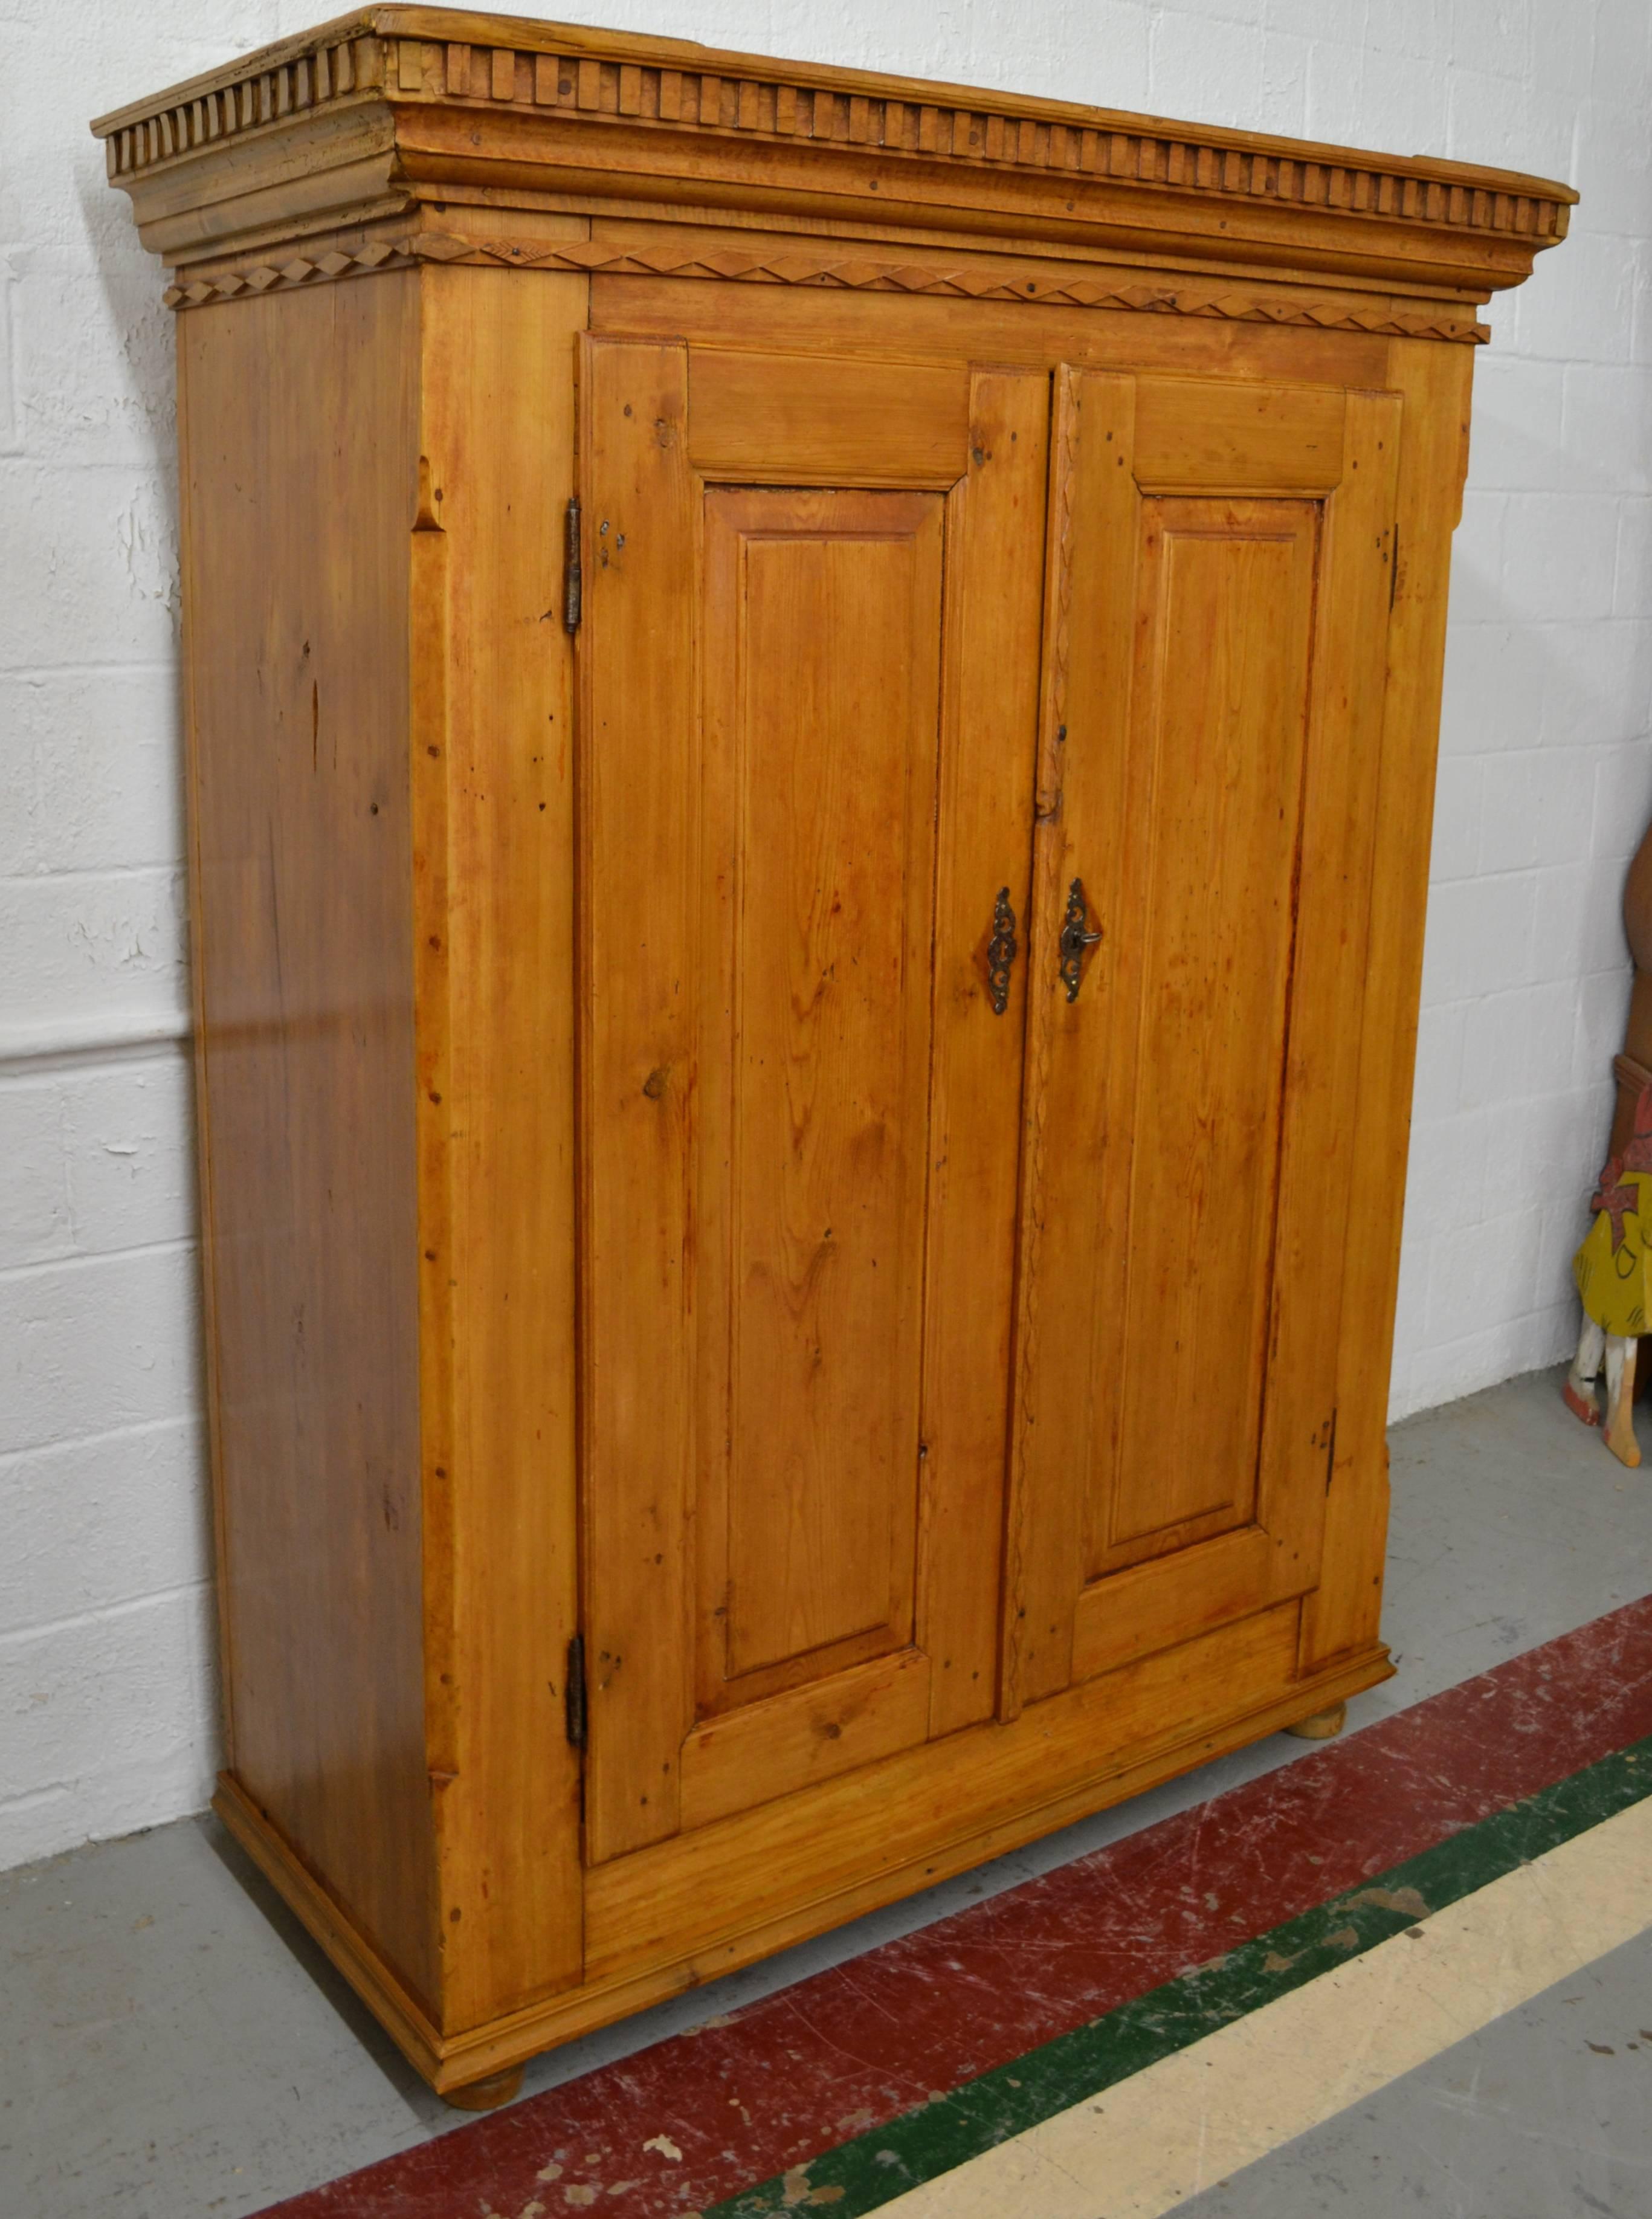 This outstanding heavy and sturdy armoire, built from stock over 1” thick, features a bold hardwood crown with hand-cut dentil molding sitting above a hand-cut trim of laterally-laid diamonds. Two raised panel doors open wide on fiche hinges and